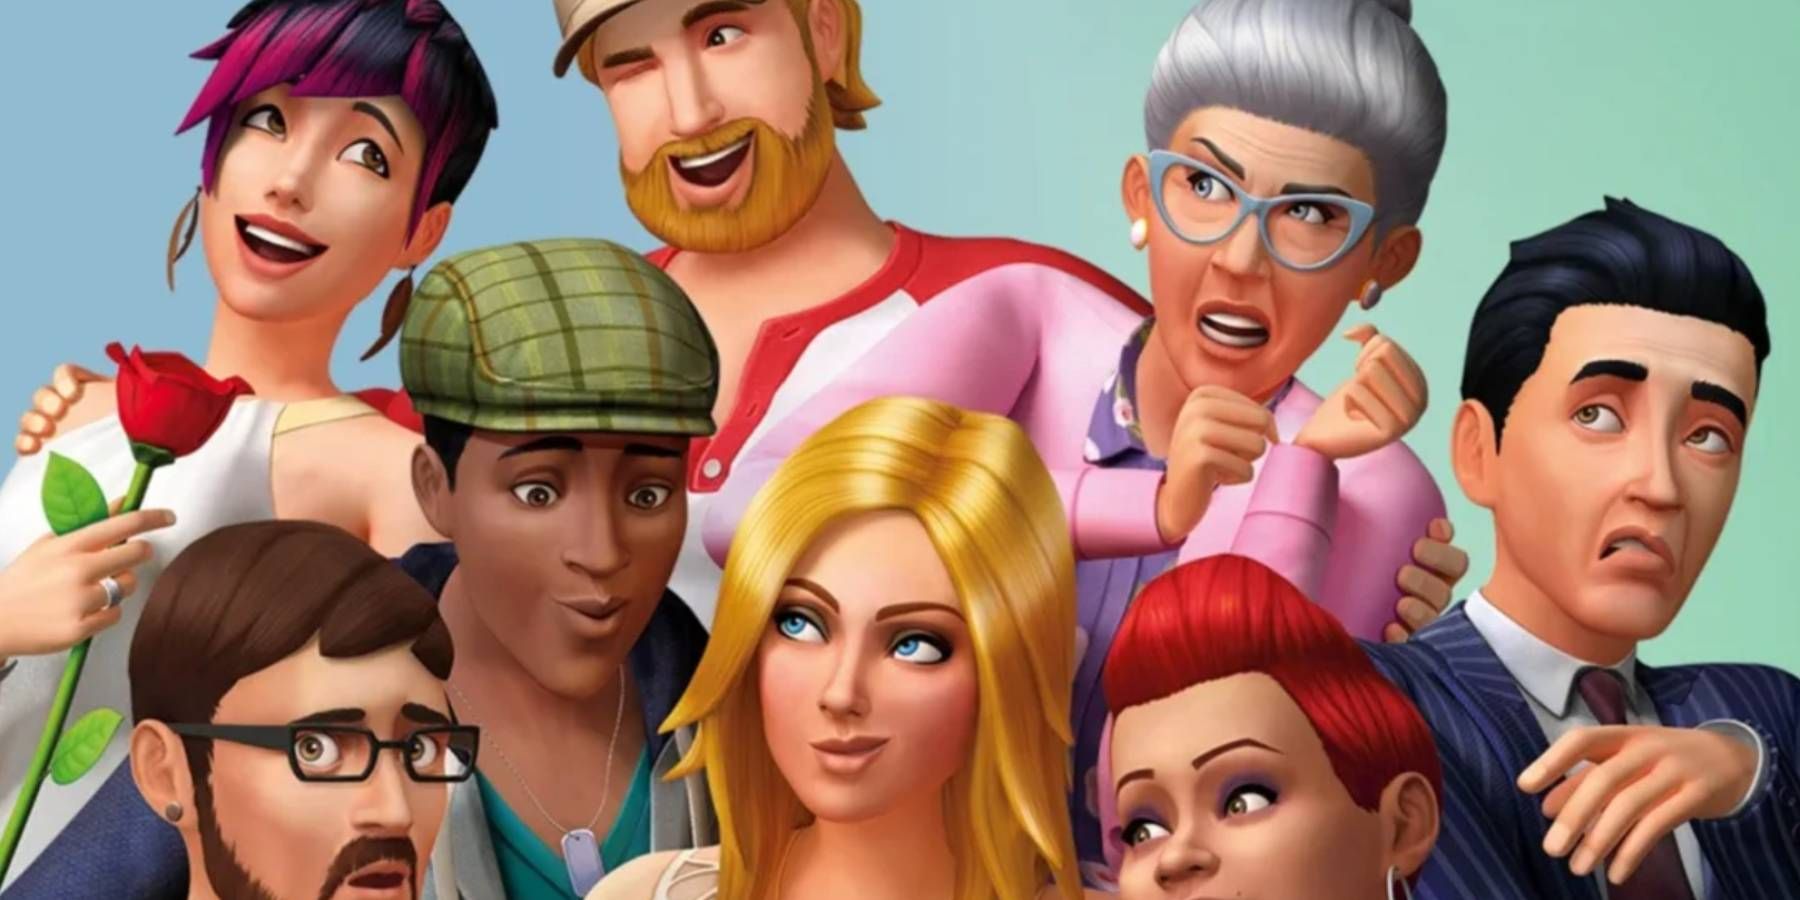 The Sims 4' adds a new skin feature to diversify representation in